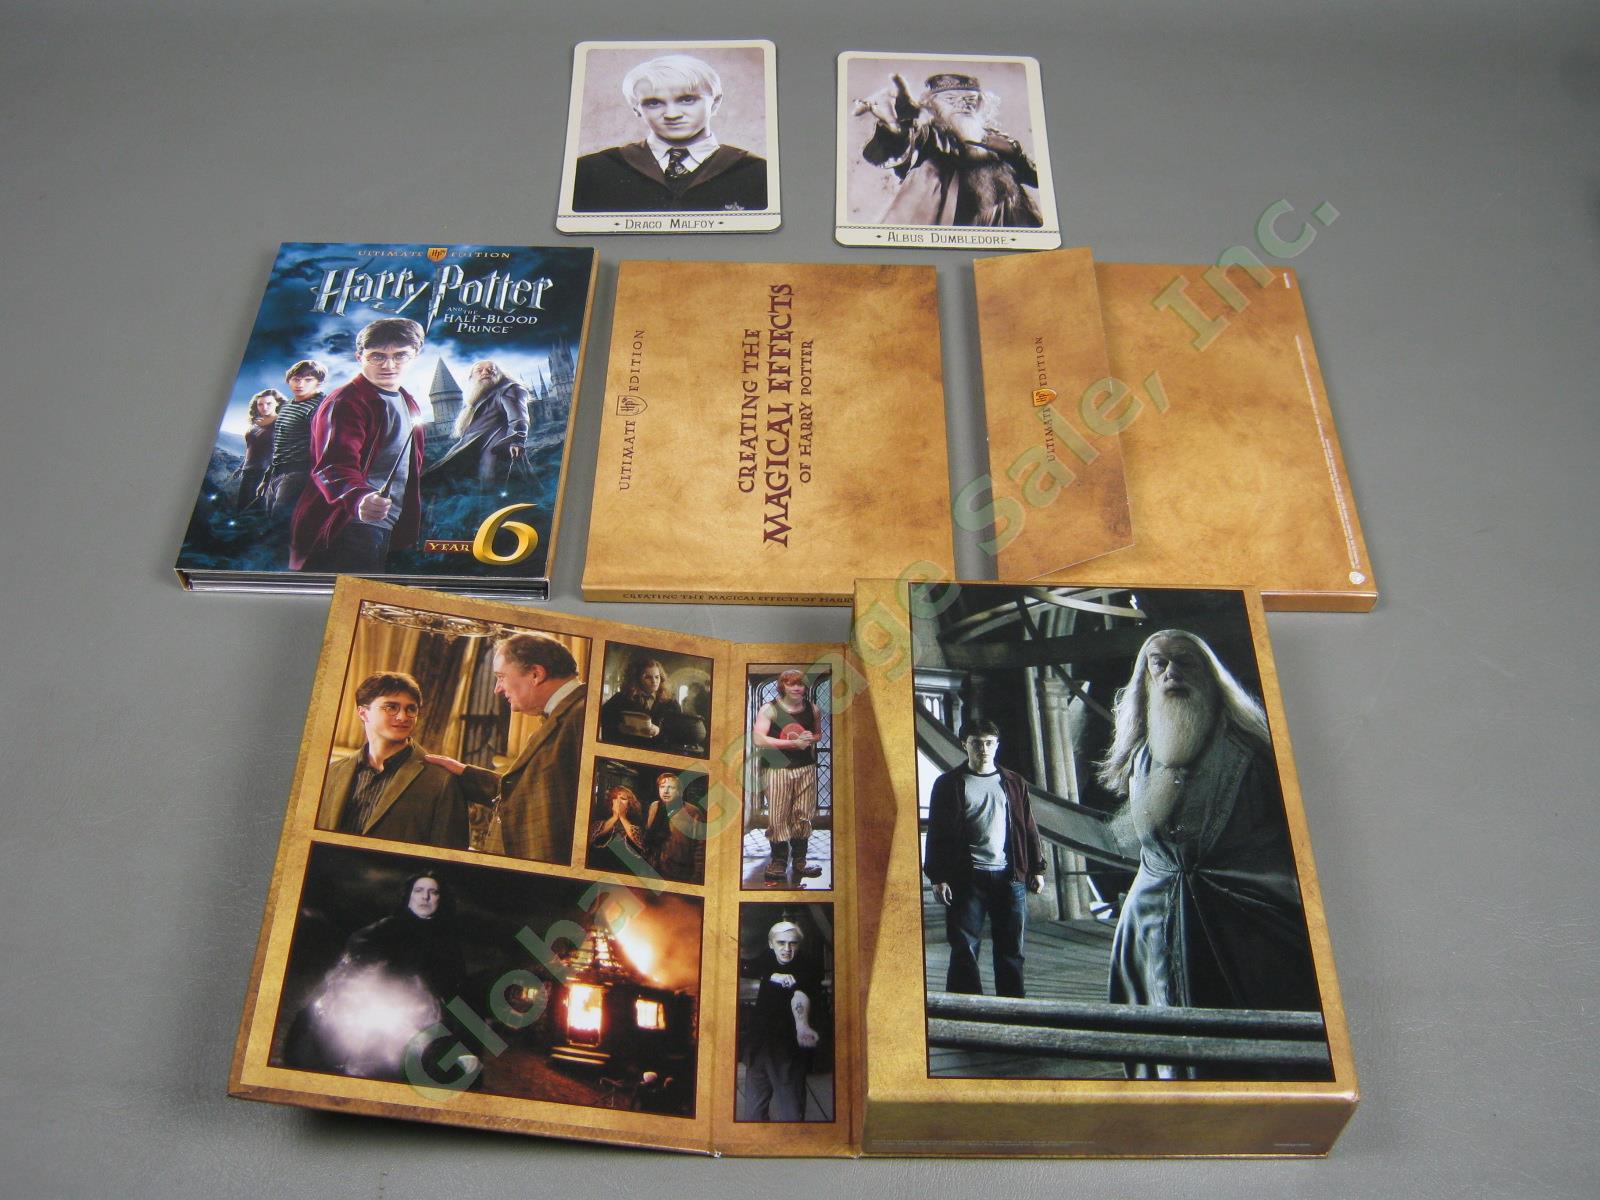 Complete Set Of 7 Harry Potter Ultimate Edition Blu-Ray Movies W/ Boxes Booklets 8